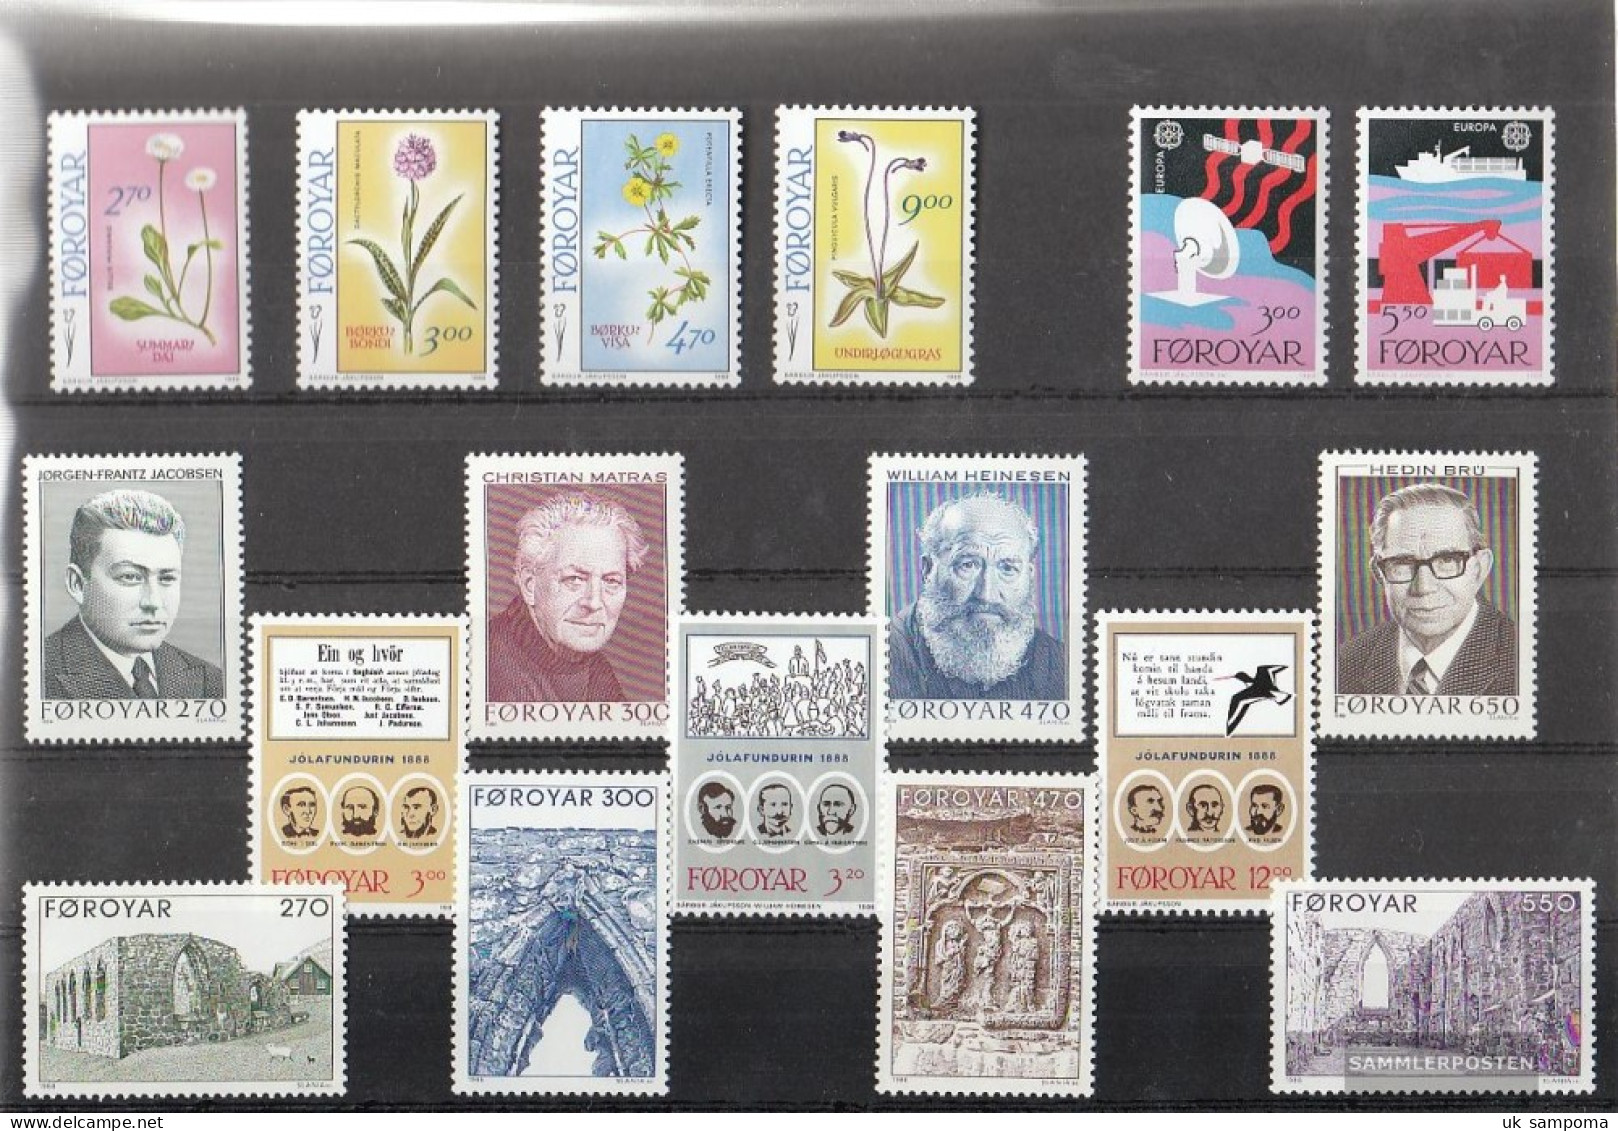 Denmark - Faroe Islands Unmounted Mint / Never Hinged 1988 Complete Volume In Clean Conservation - Années Complètes